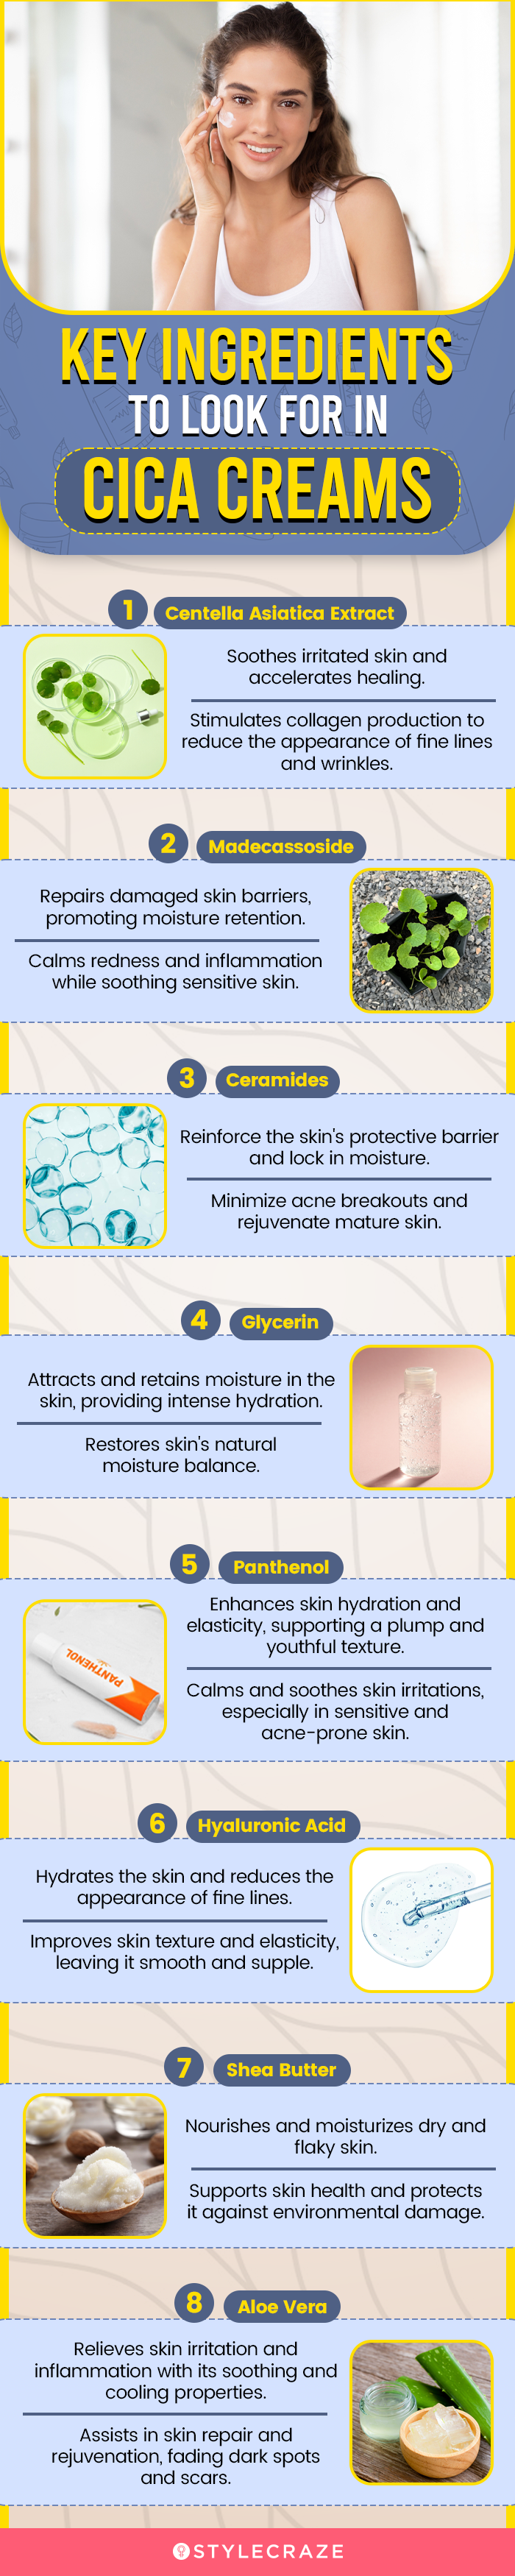 Key Ingredients To Look For In Cica Creams (infographic)